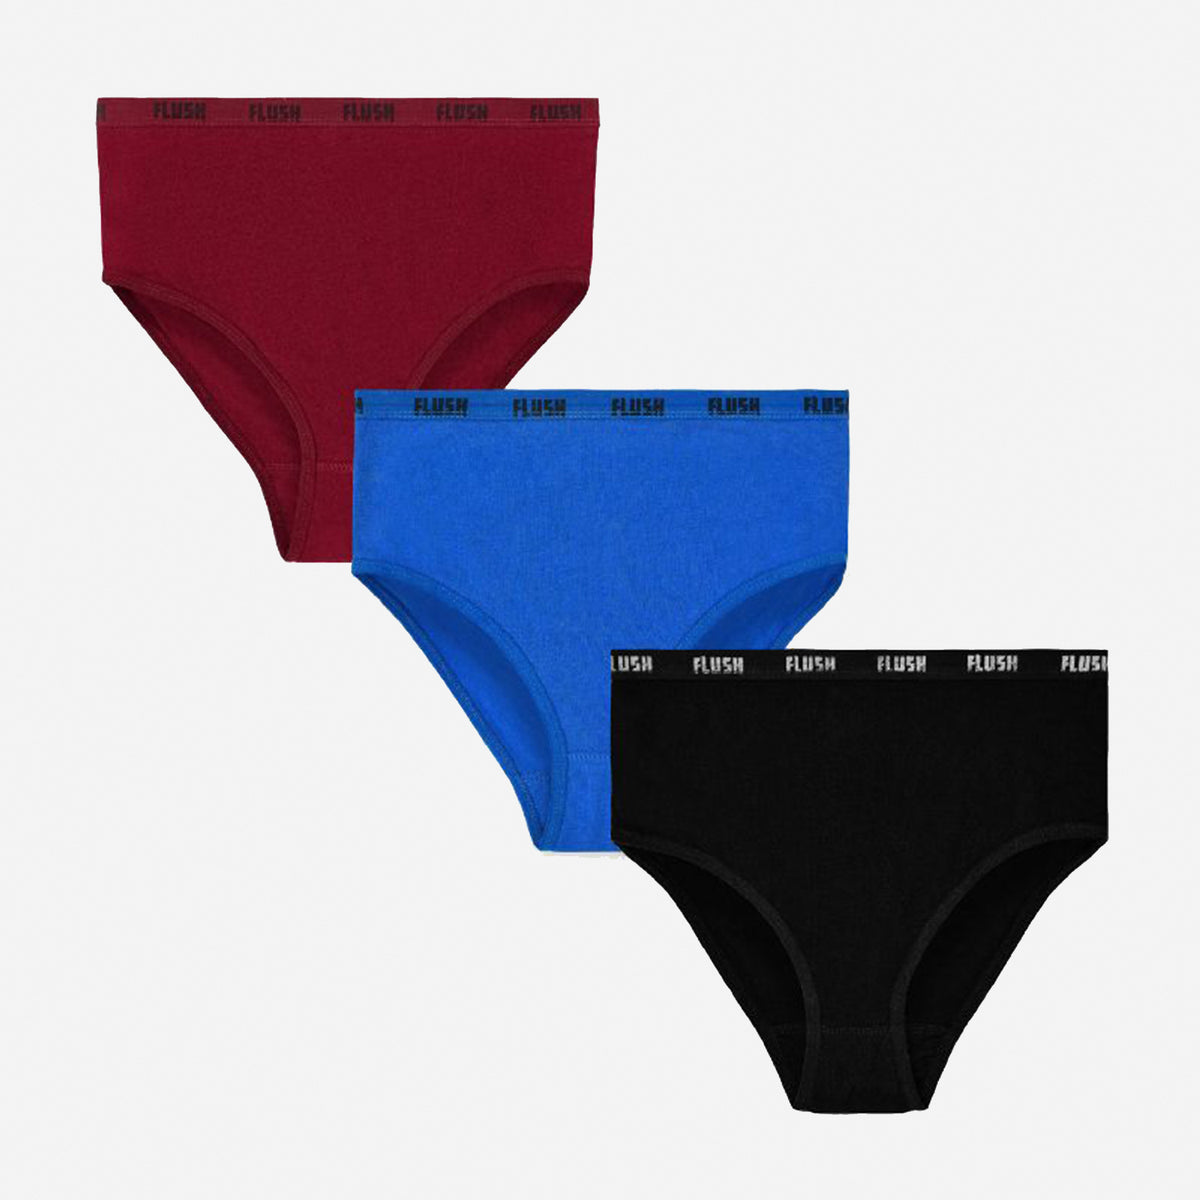 Women's Cotton Underwear Brief Tagless and Breathable - Pack of 3